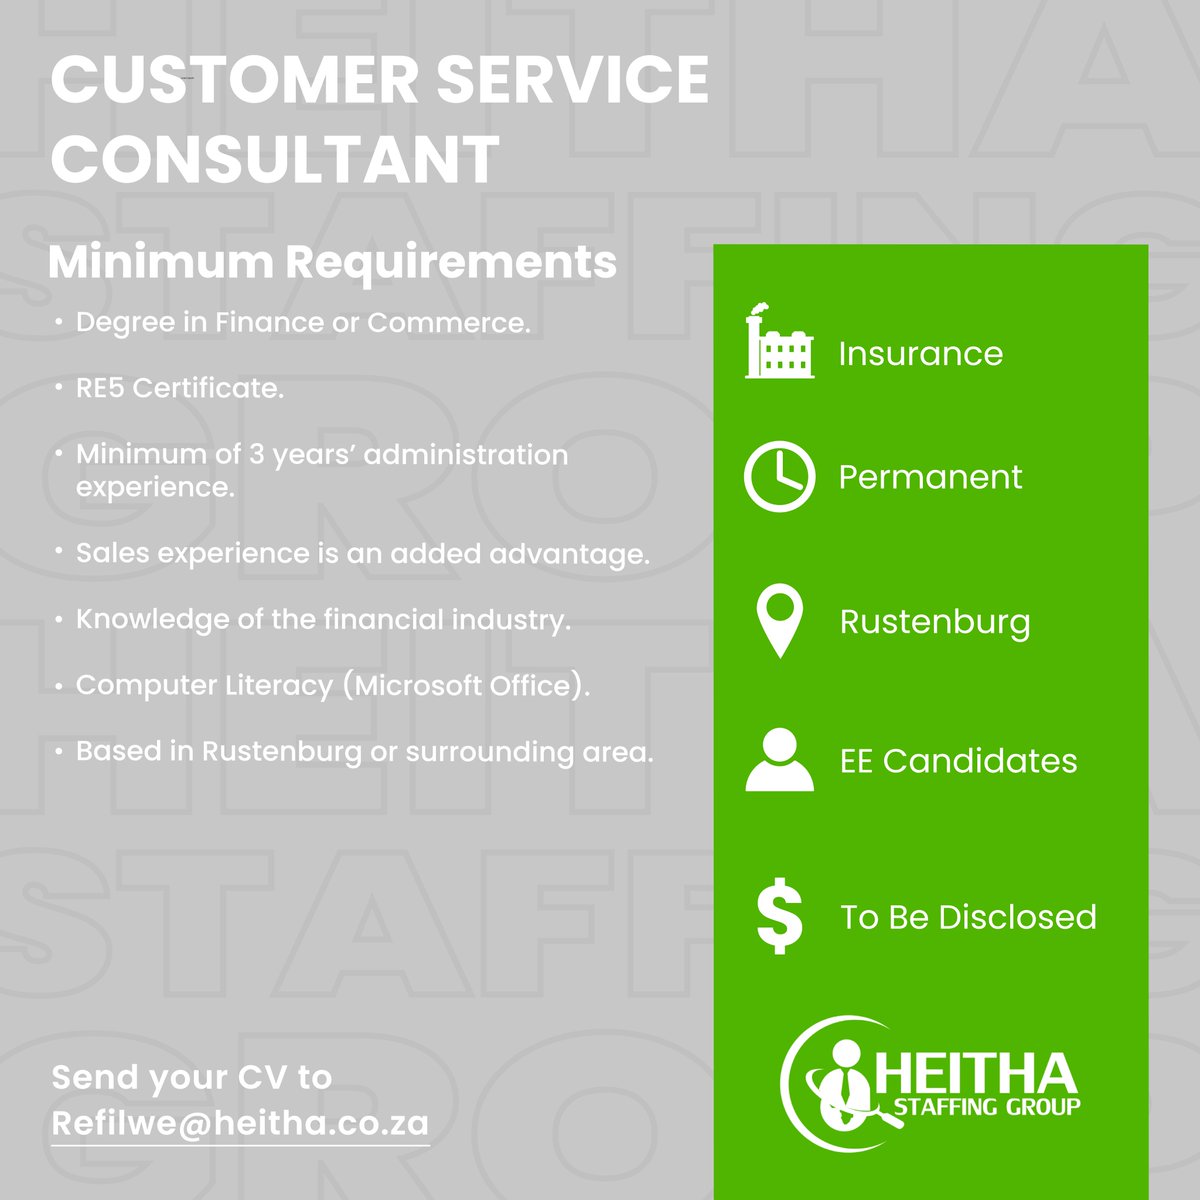 📌 CUSTOMER SERVICE CONSULTANT

Learn more about this vacancy on our website: heitha.co.za/jobs/customer-…

To apply please send your CV to Refilwe@heitha.co.za

Vacancy expires: 19 April 2024

#HeithaStaffingGroup #JobSeekersSA #JobAdviceSA #Insurance #CustomerServiceConsultant